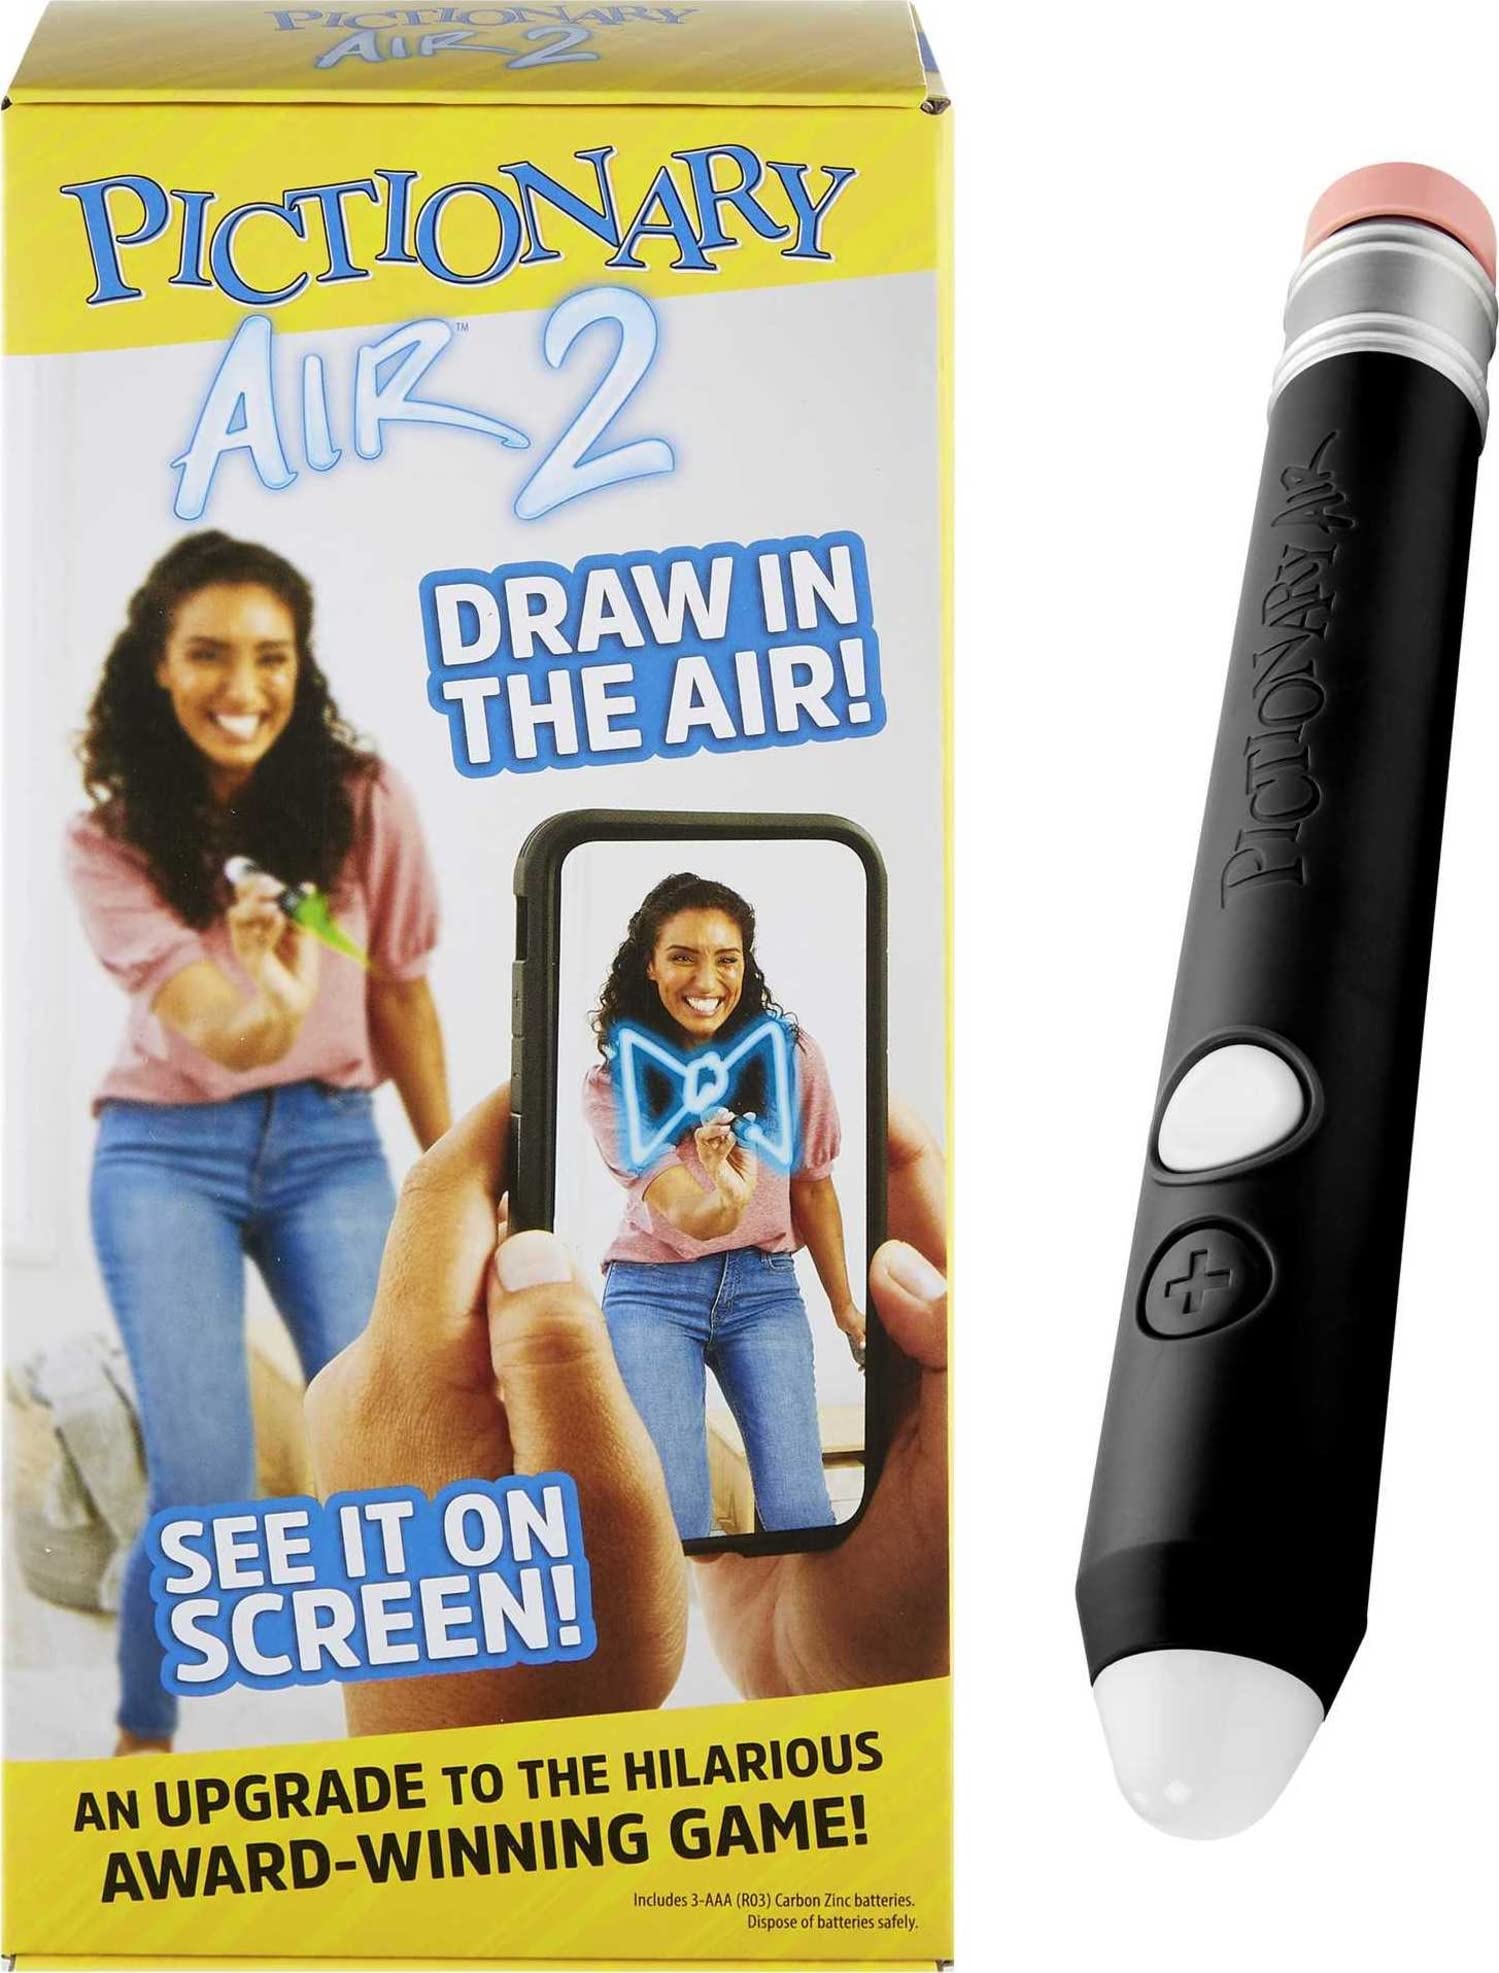 Pictionary Air 2 Family Game for Kids and Adults with Exclusive Black Color Light Pen & Digital Clue Packs (Amazon Exclusive)